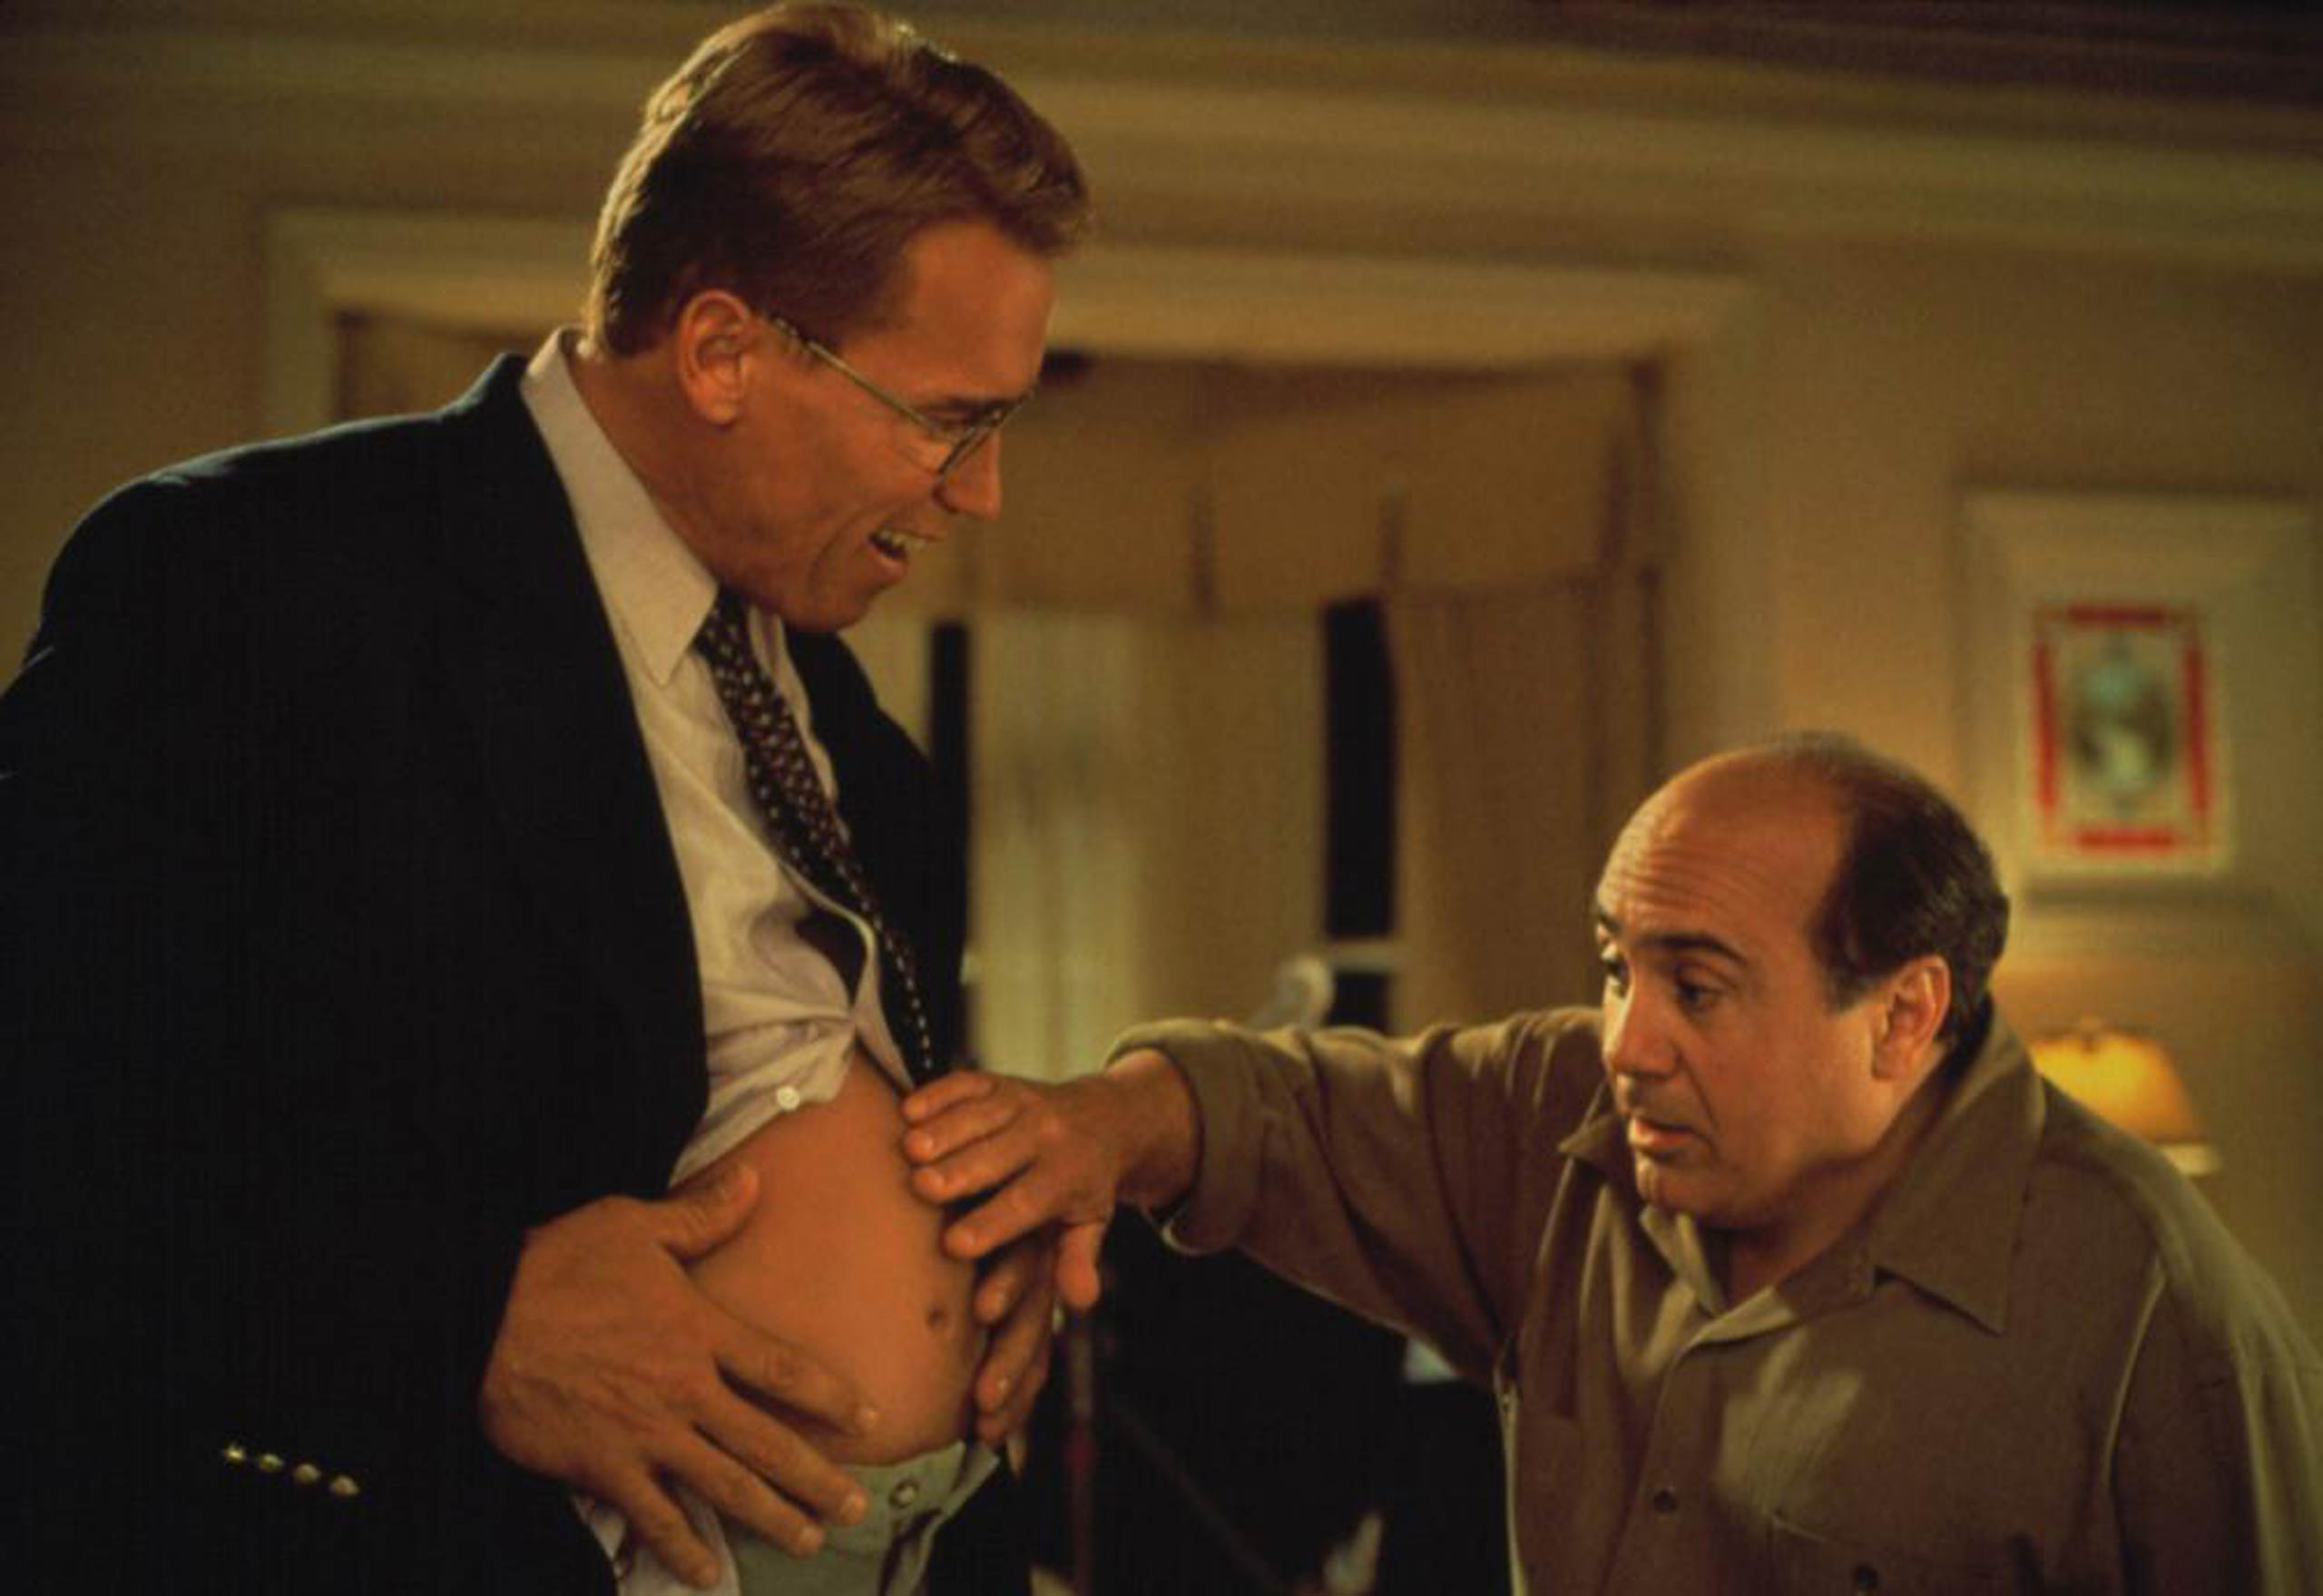 DeVito re-teamed with Schwarzenegger in 'Junior' (1994), which brought in over $100 million at the worldwide box office.